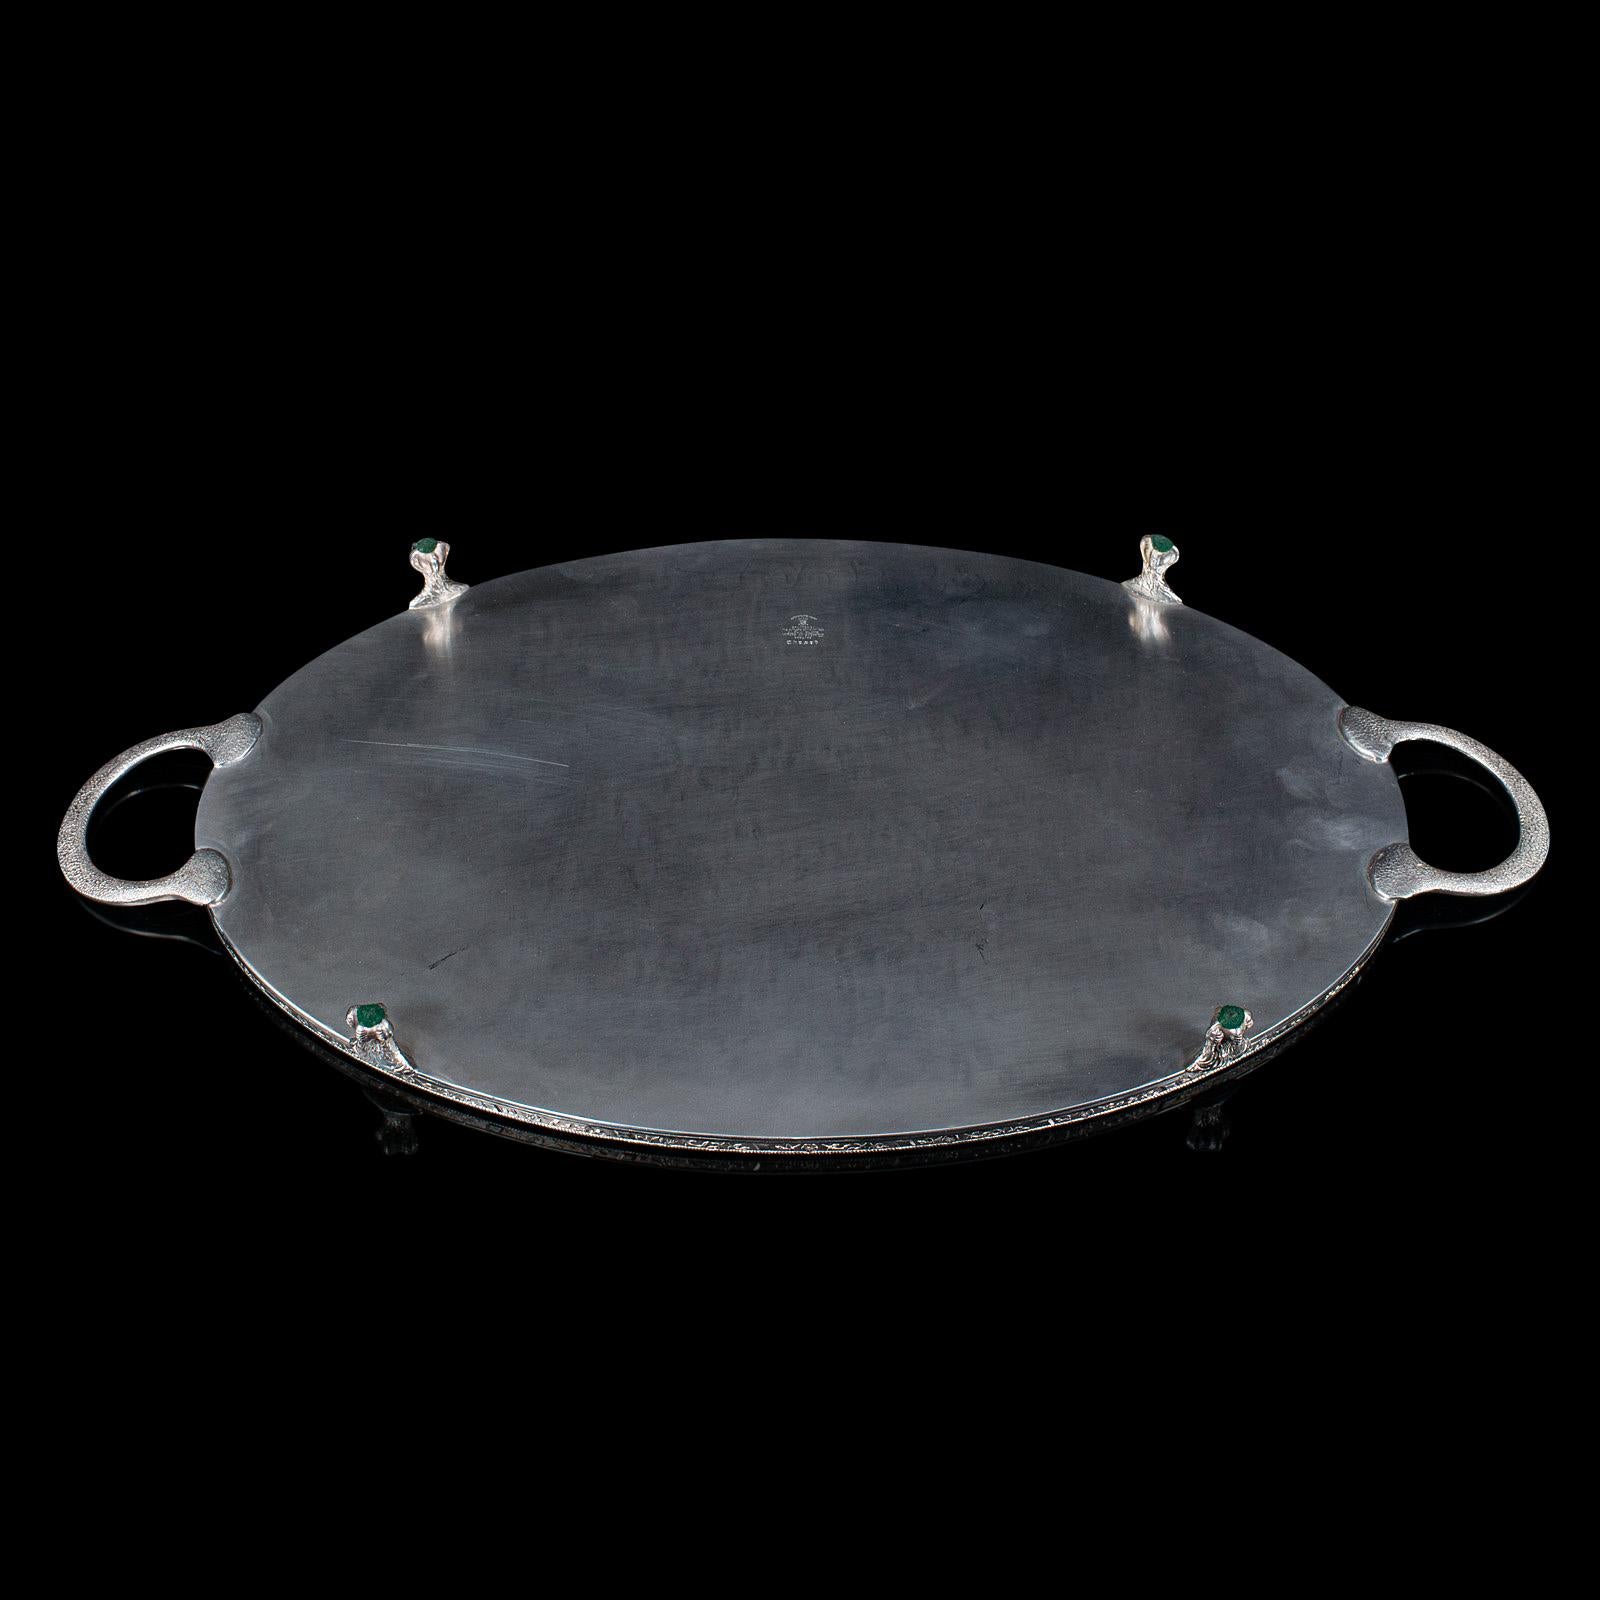 Vintage Oval Serving Tray, English, Silver Plate, Afternoon Tea, Viners, C.1950 For Sale 2